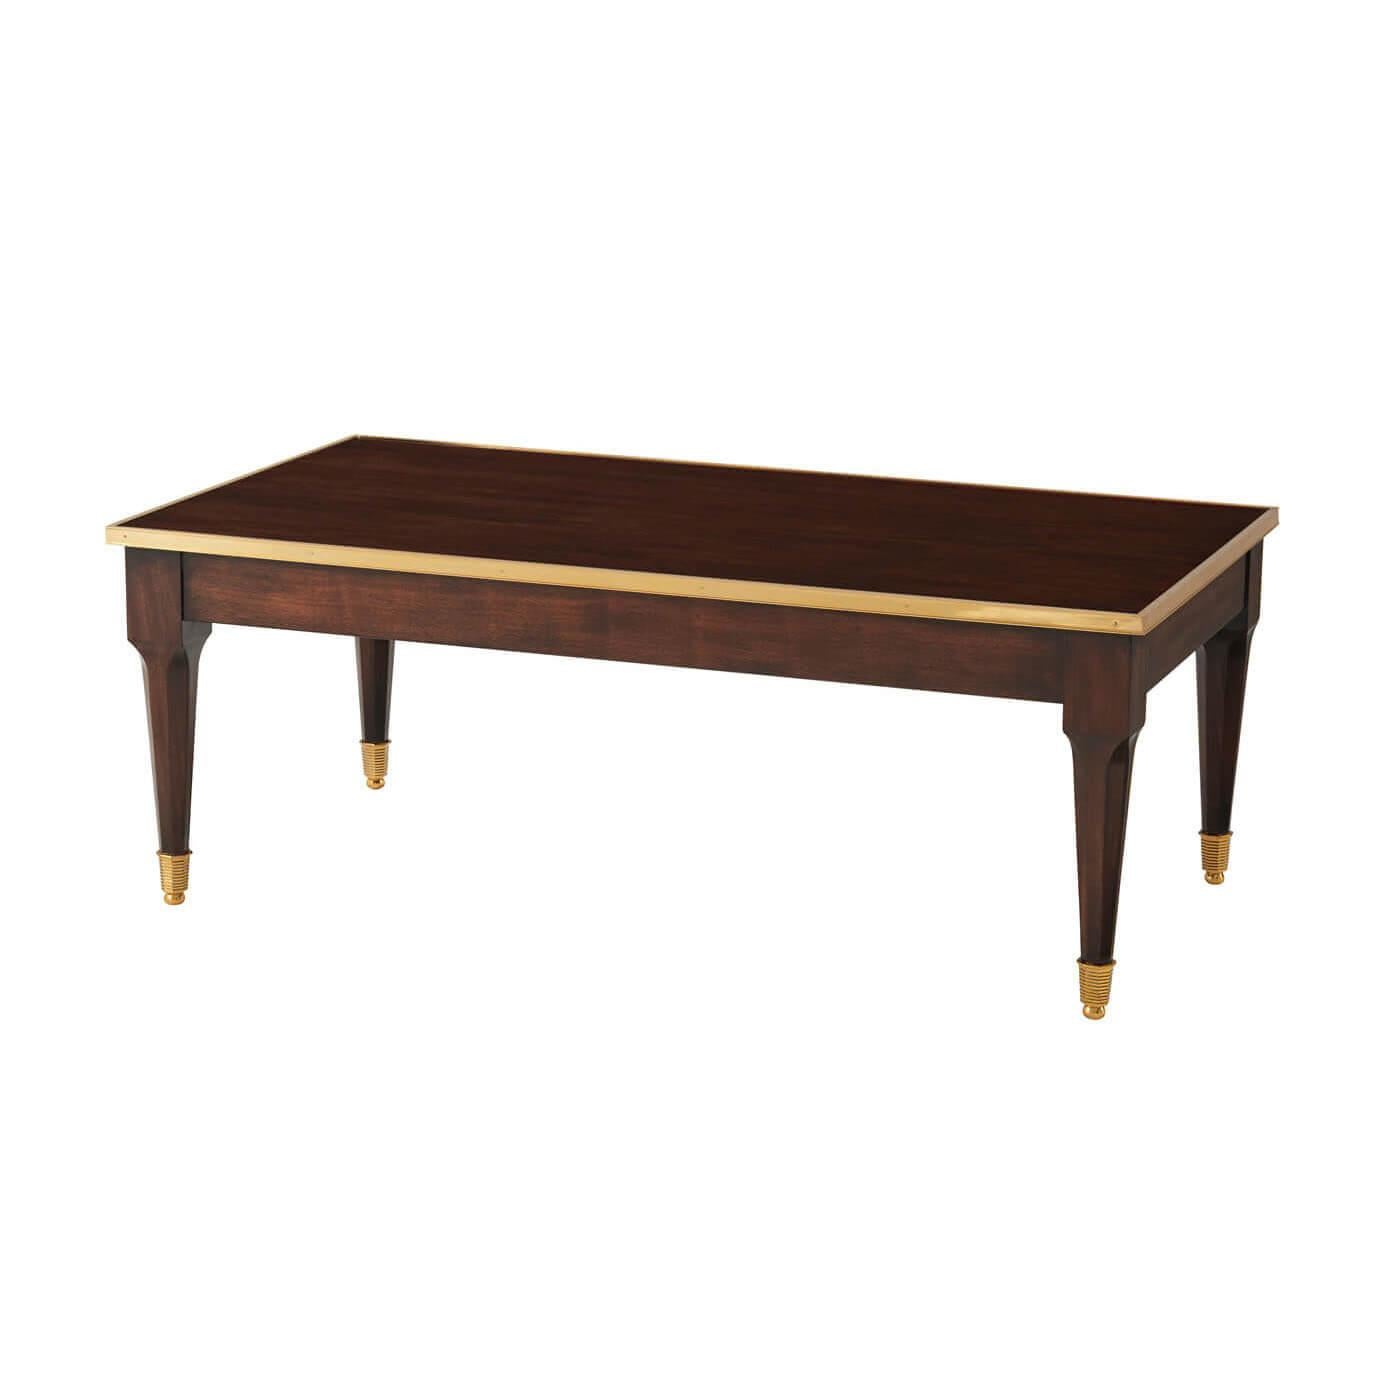 Neoclassical European Style Brass Bound Coffee Table For Sale